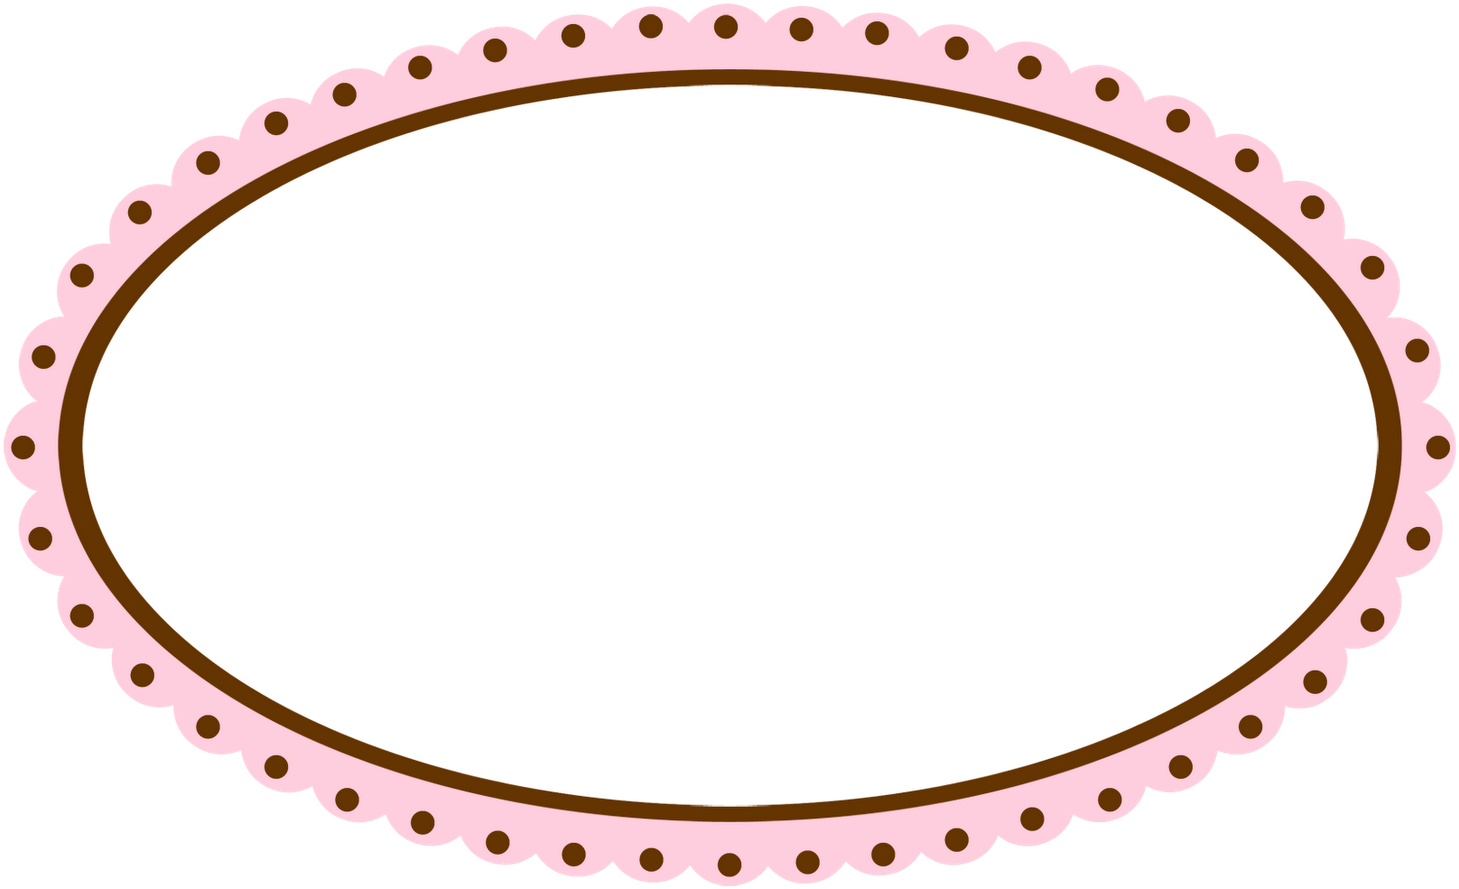 A Pink Oval Frame With Brown Dots